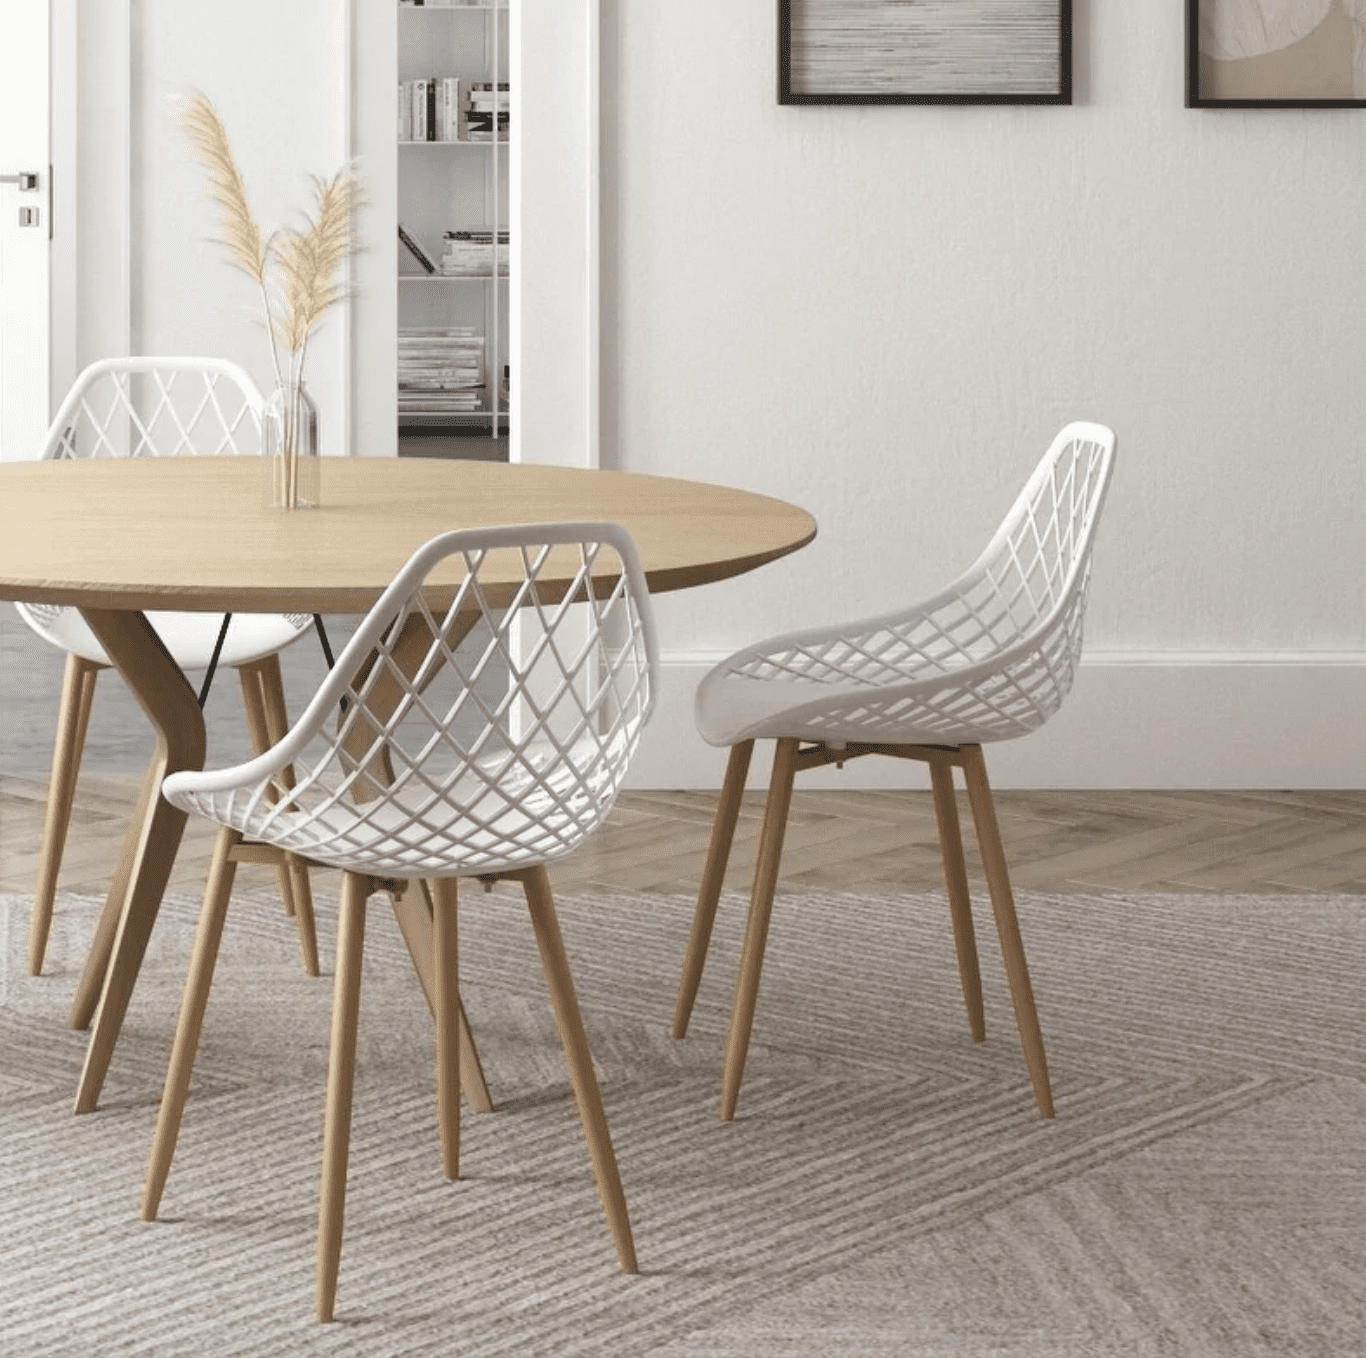 Best Dining Table : 10 Picks for Any Budget and Room Size